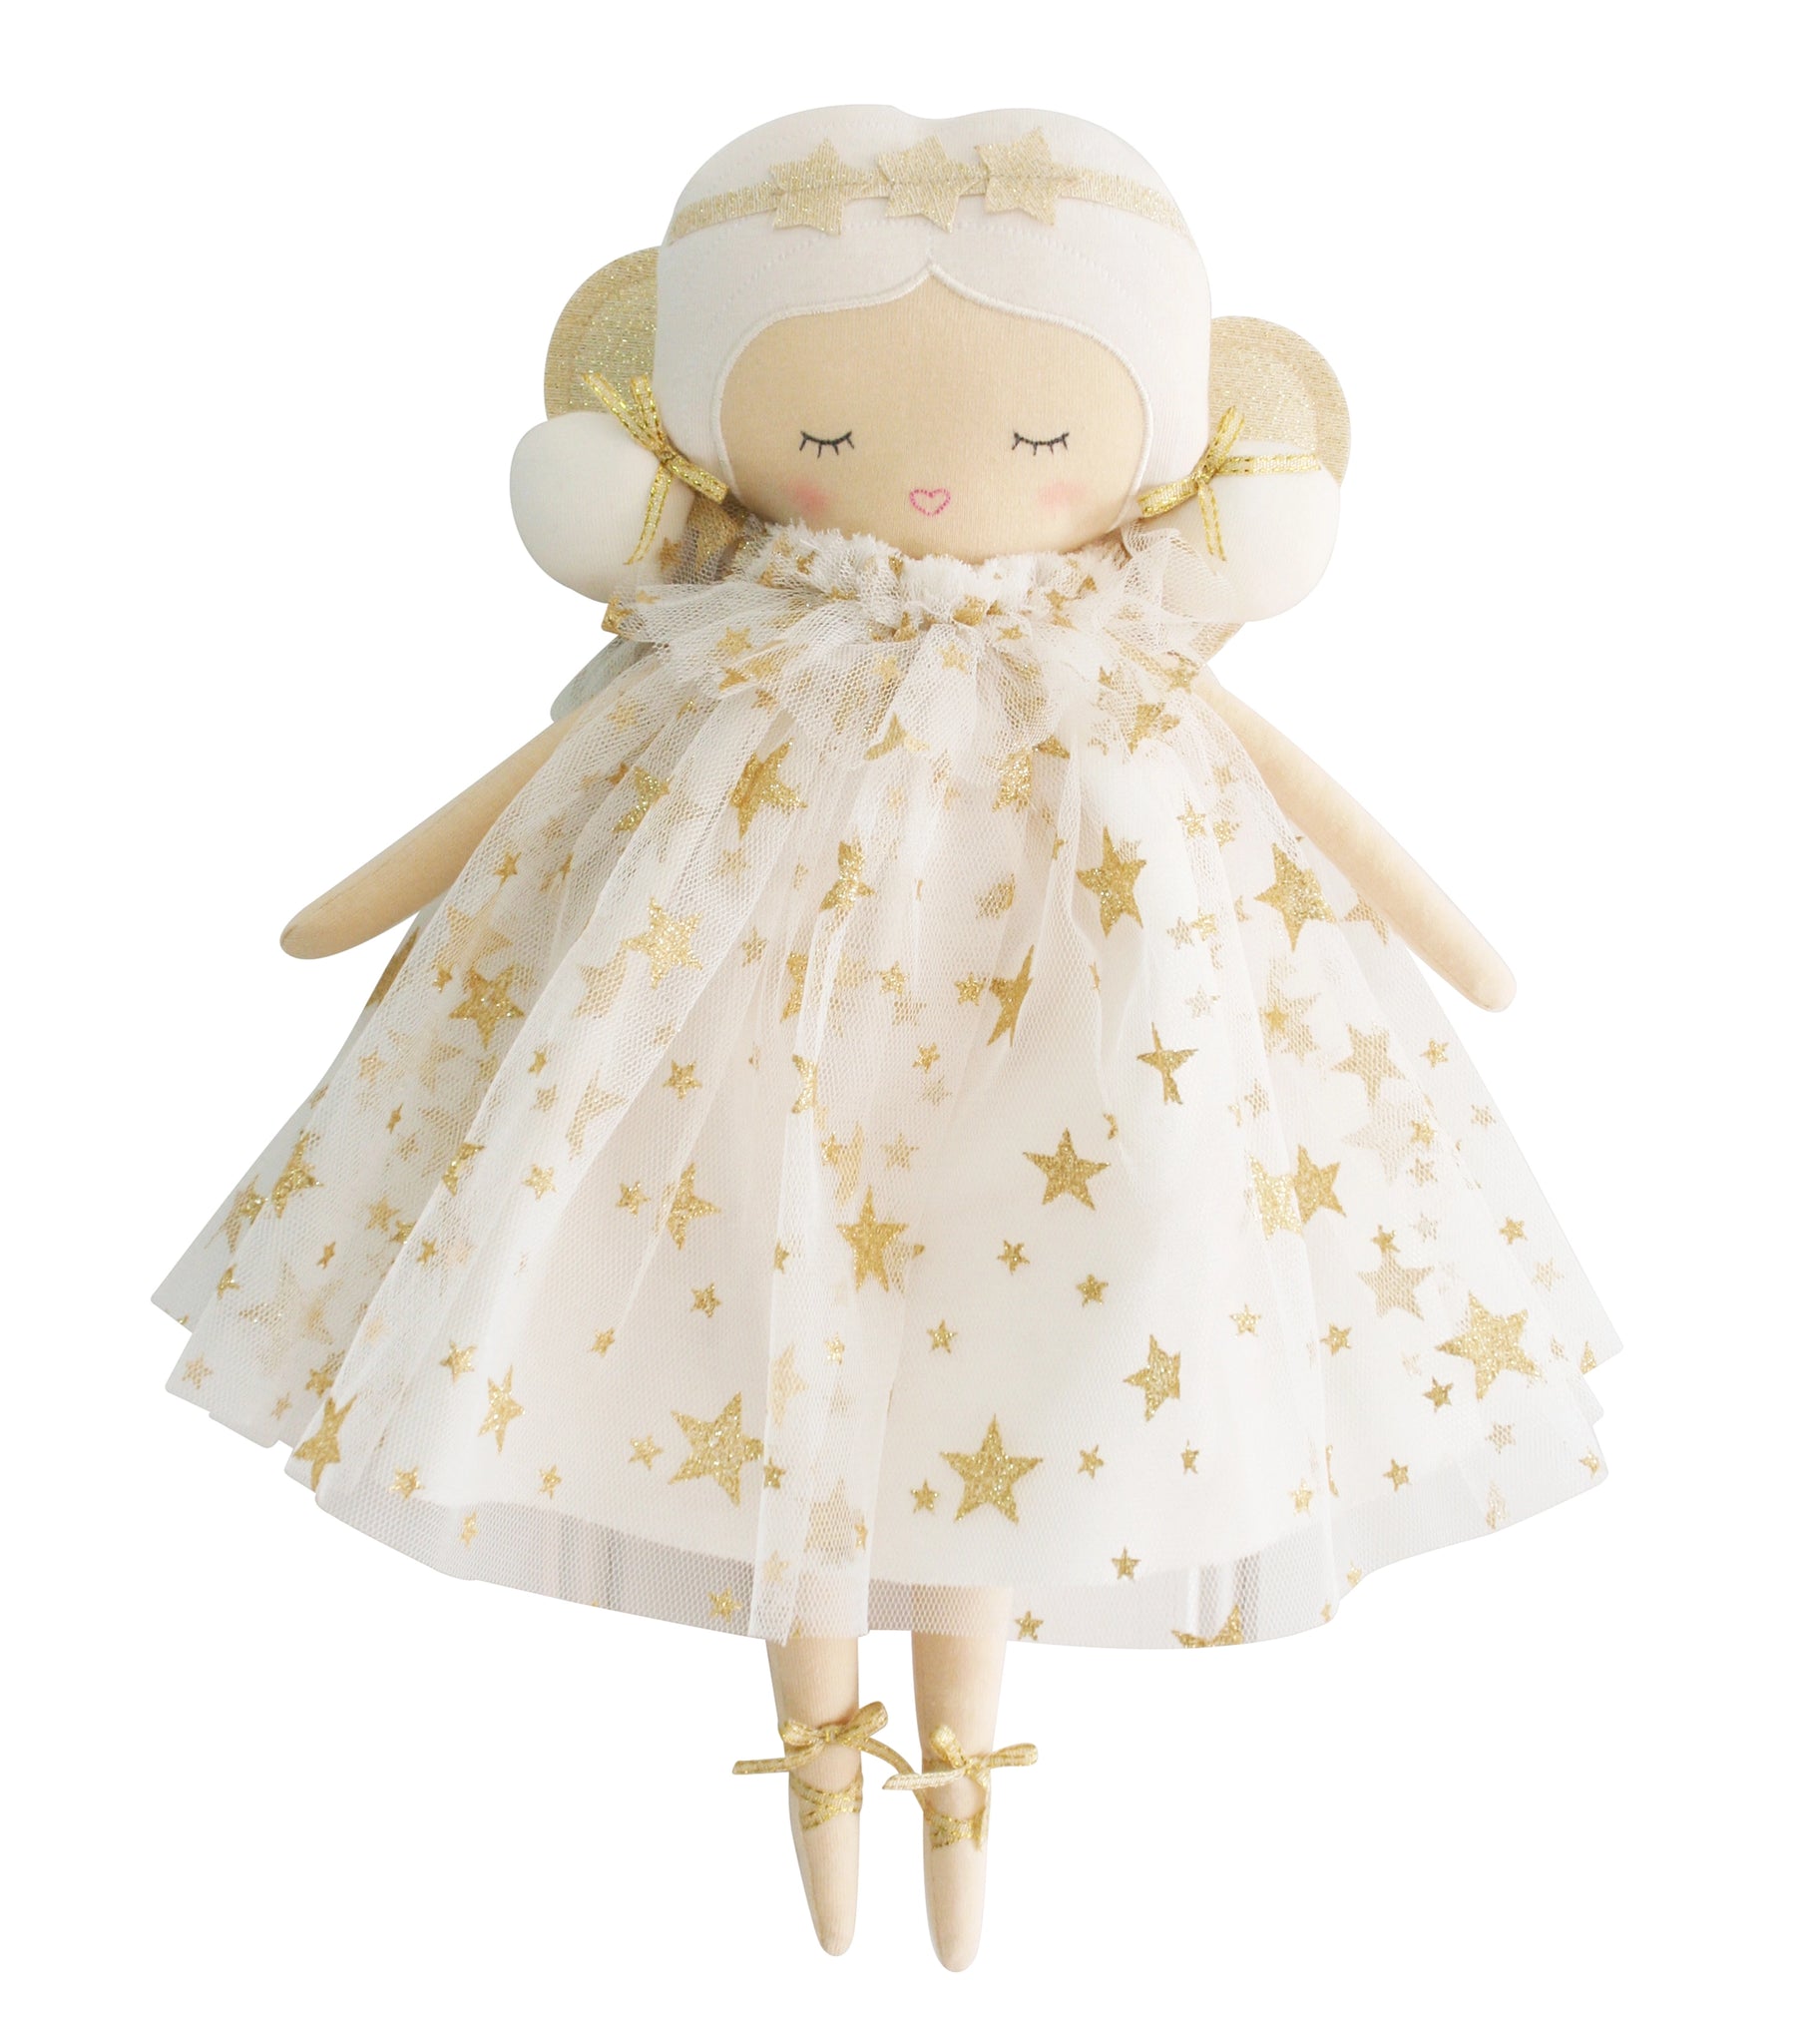 Willow Fairy Doll - Ivory Gold Star